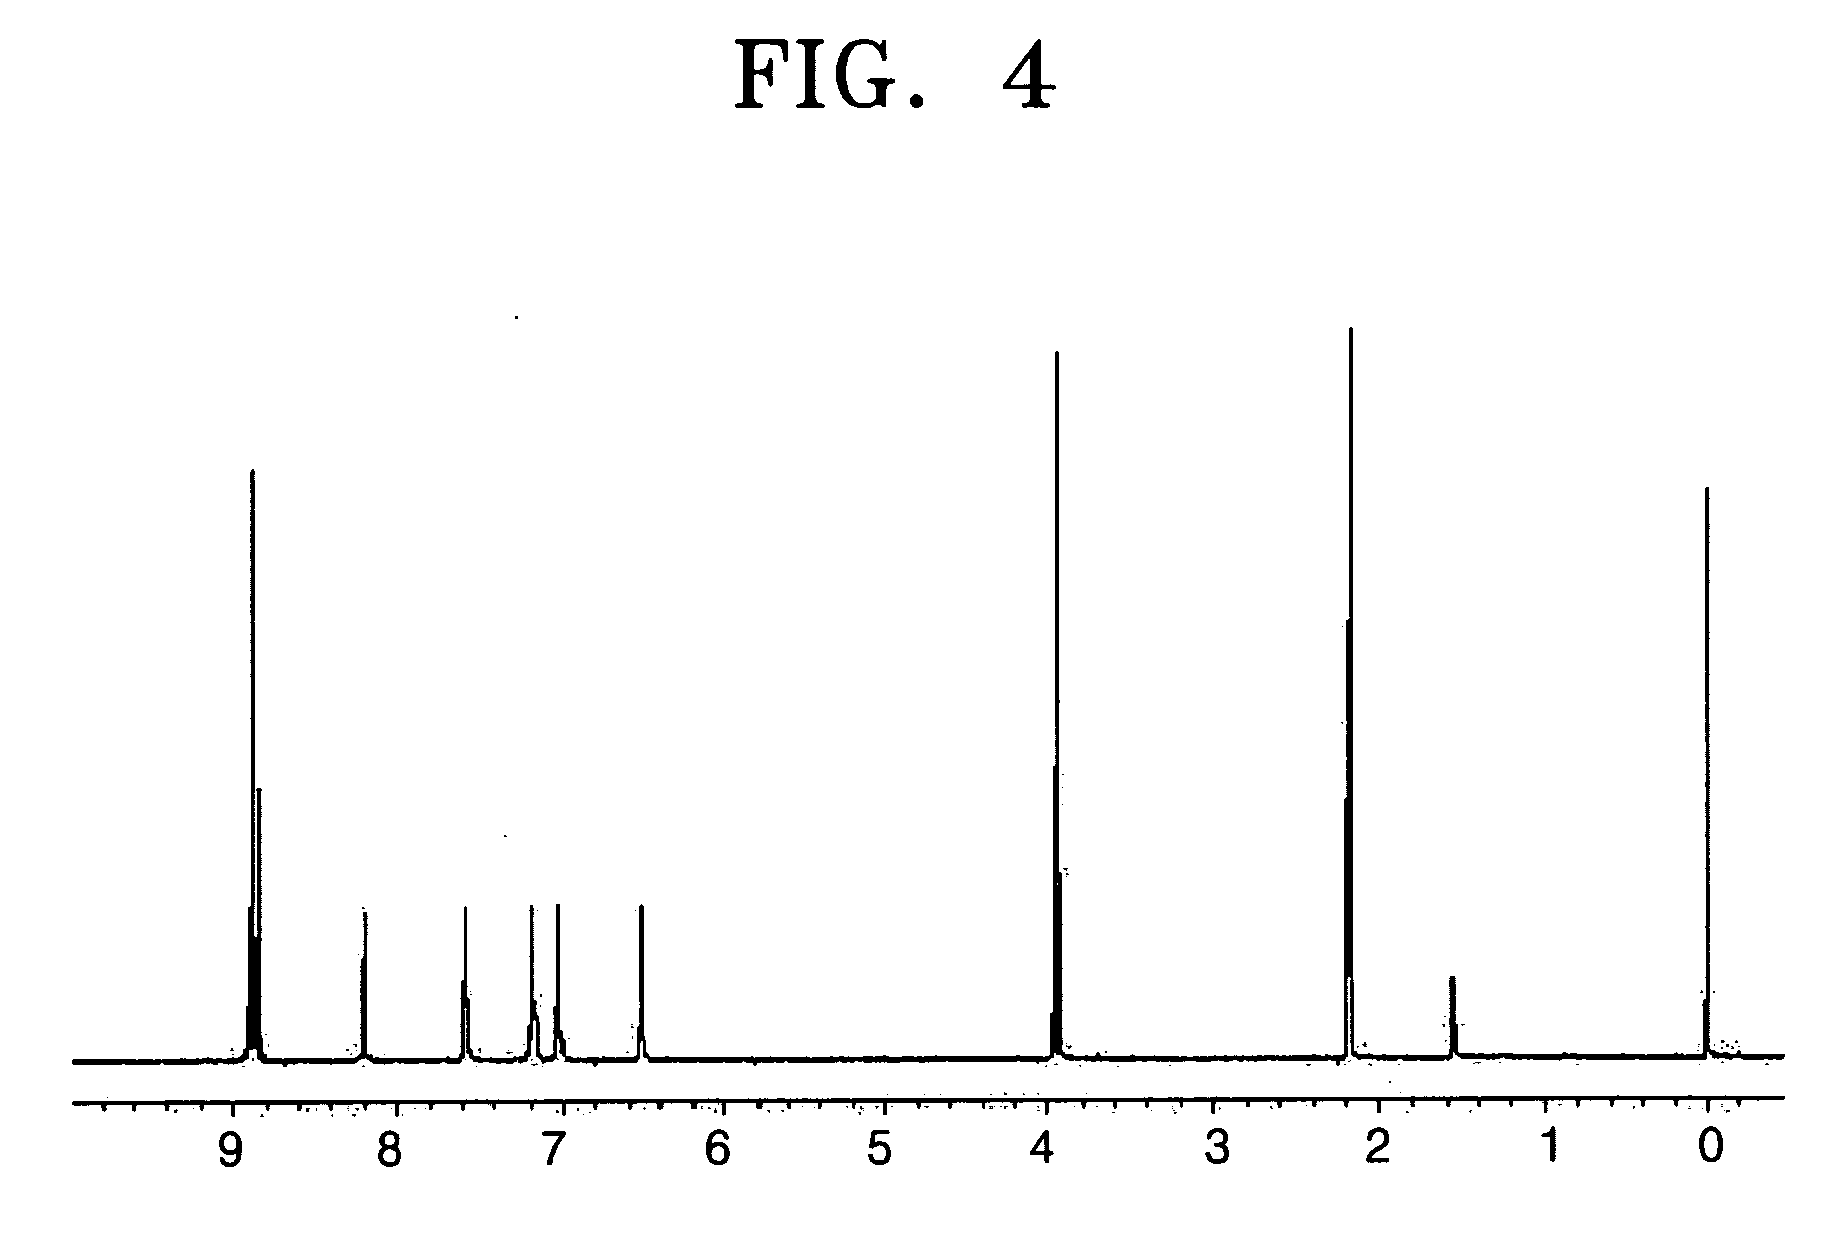 Electrophotographic photoreceptor containing naphthalenetetracarboxylic acid diimide derivative as electron transporting material in a charge generating layer and electrophotographic image forming apparatus employing the photoreceptor